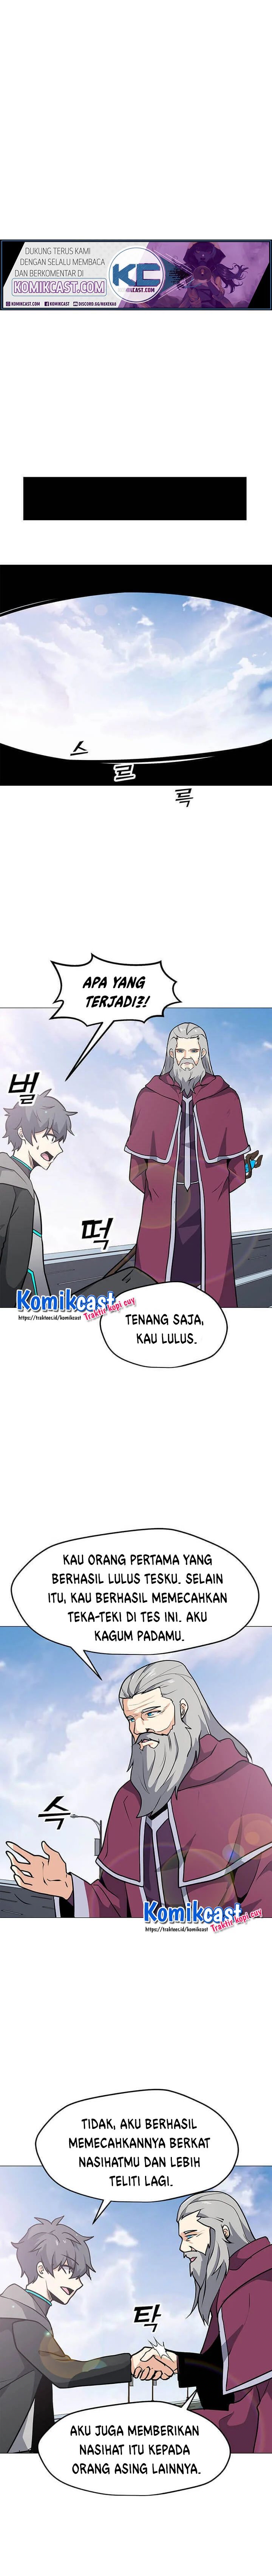 Solo Spell Caster Chapter 33